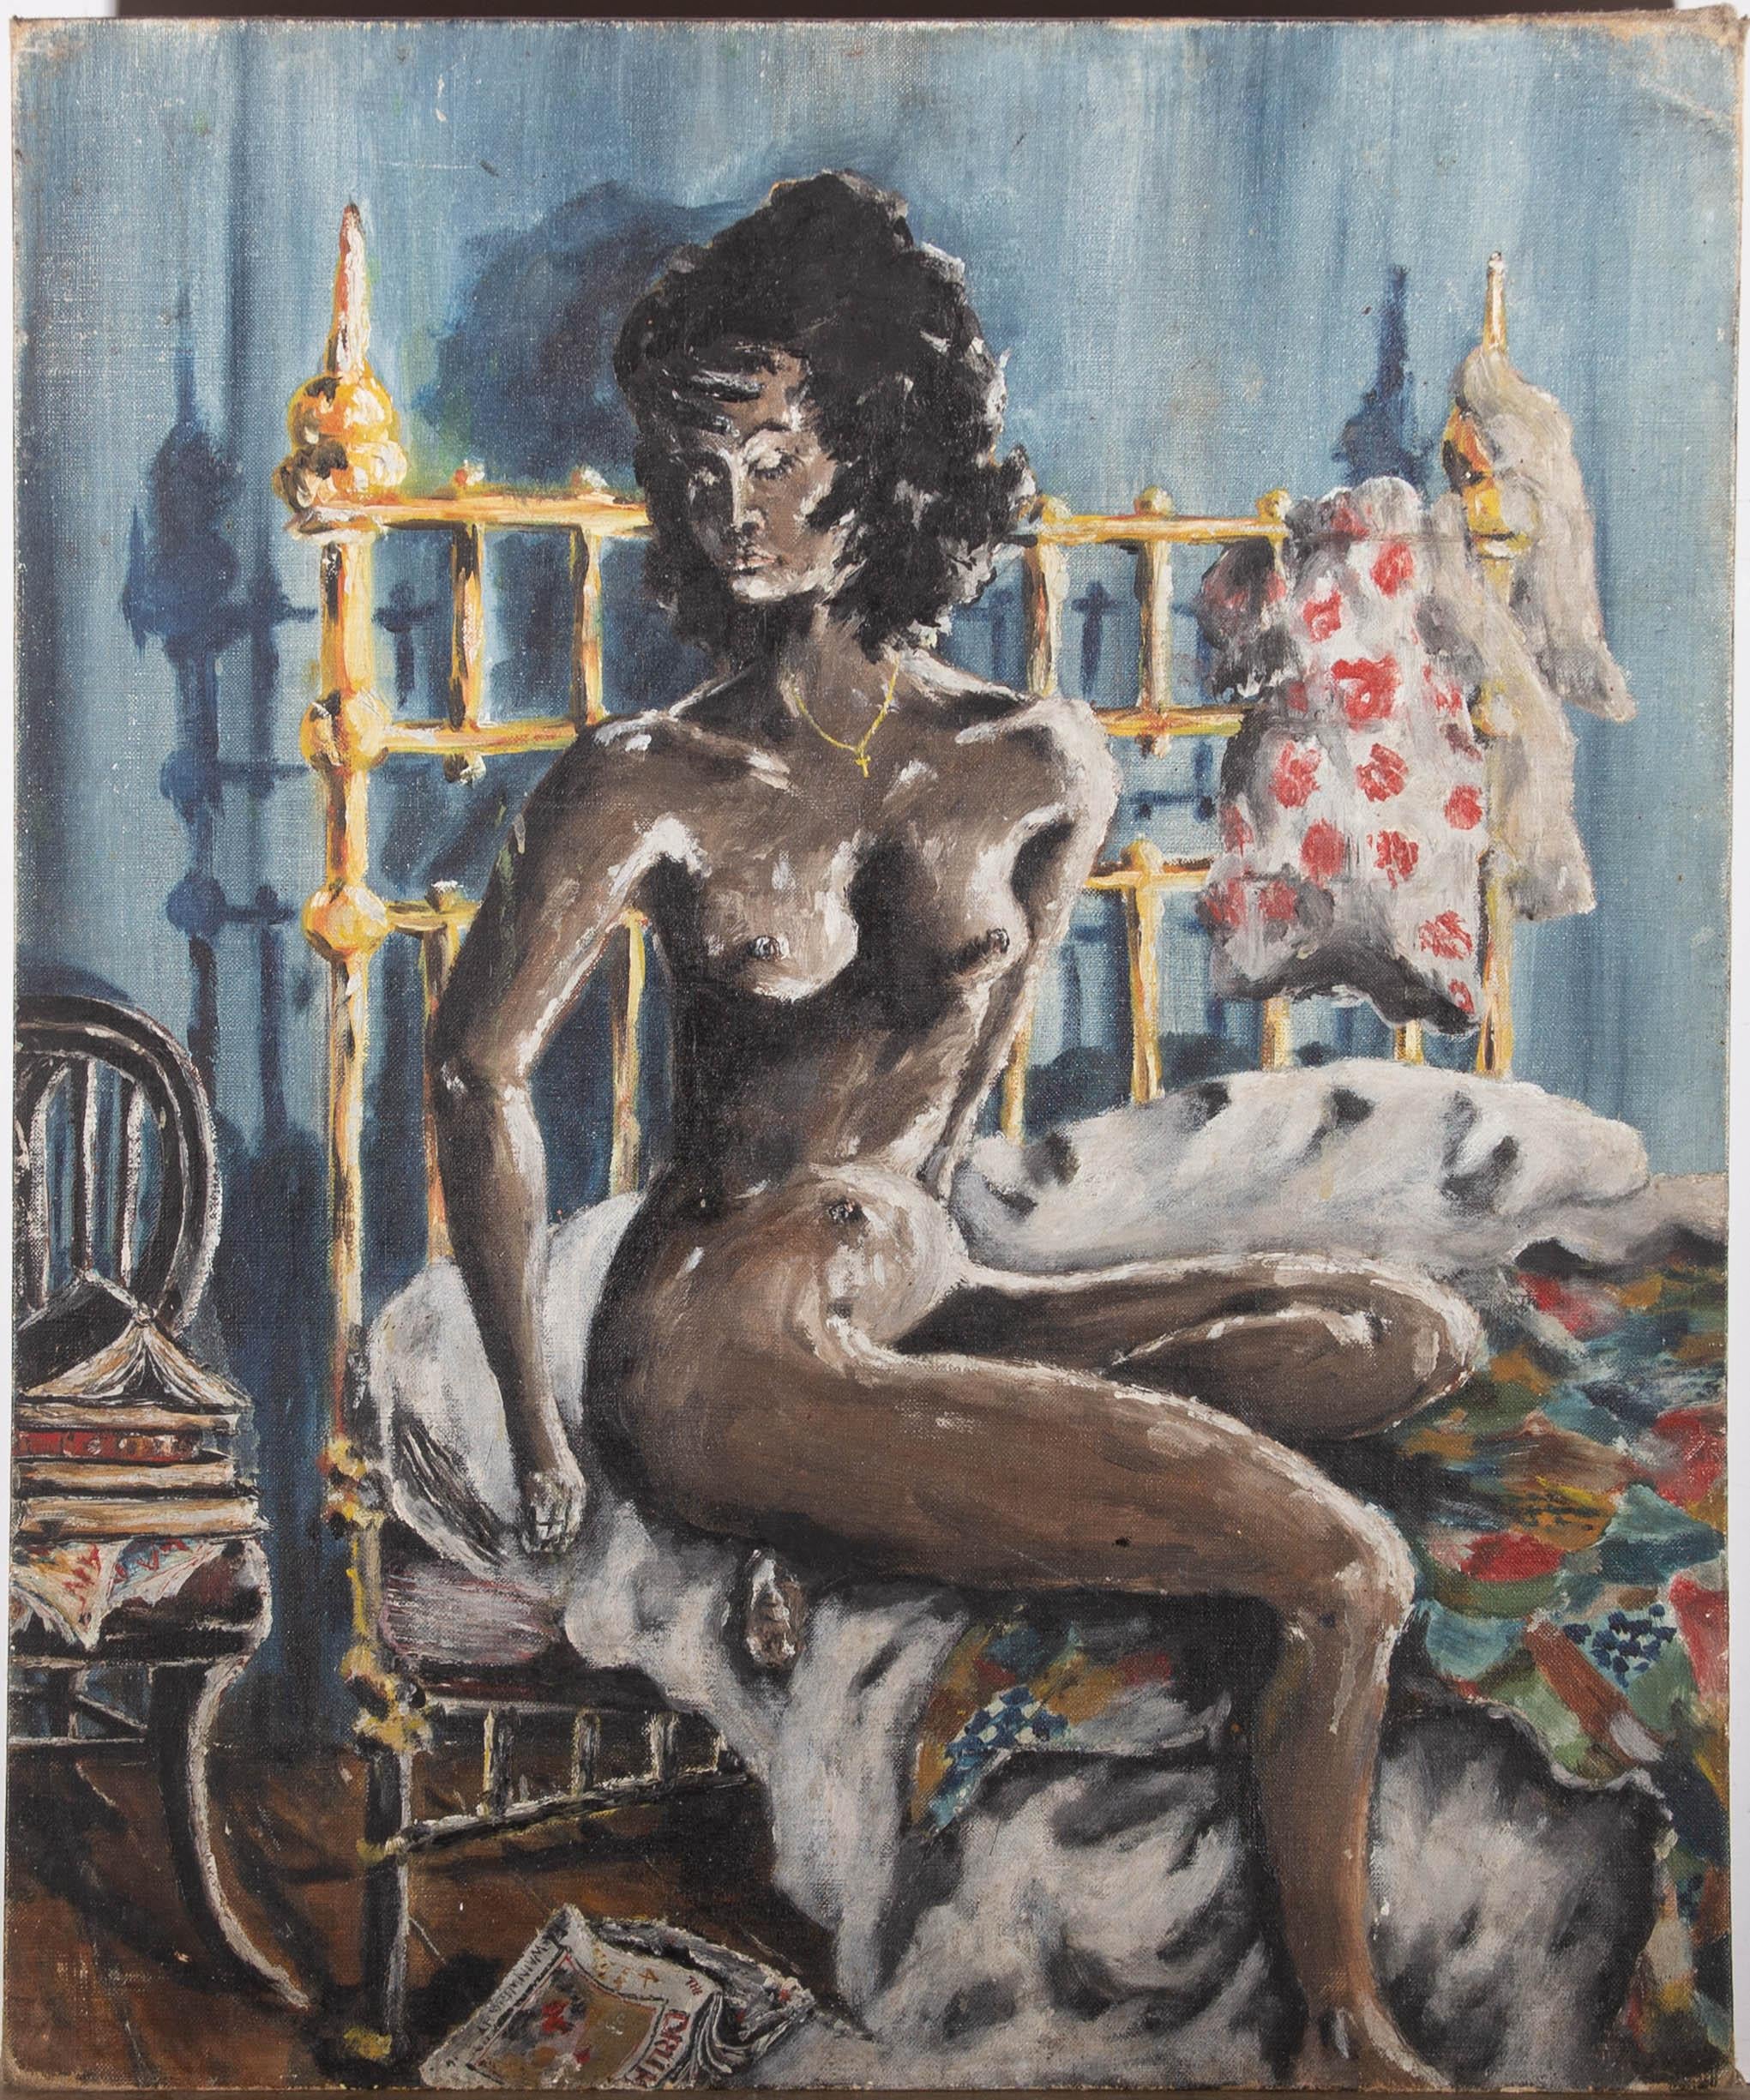 Mid 20th Century Oil - Portrait of Nude Female Figure in Bedroom - Gray Portrait Painting by Unknown